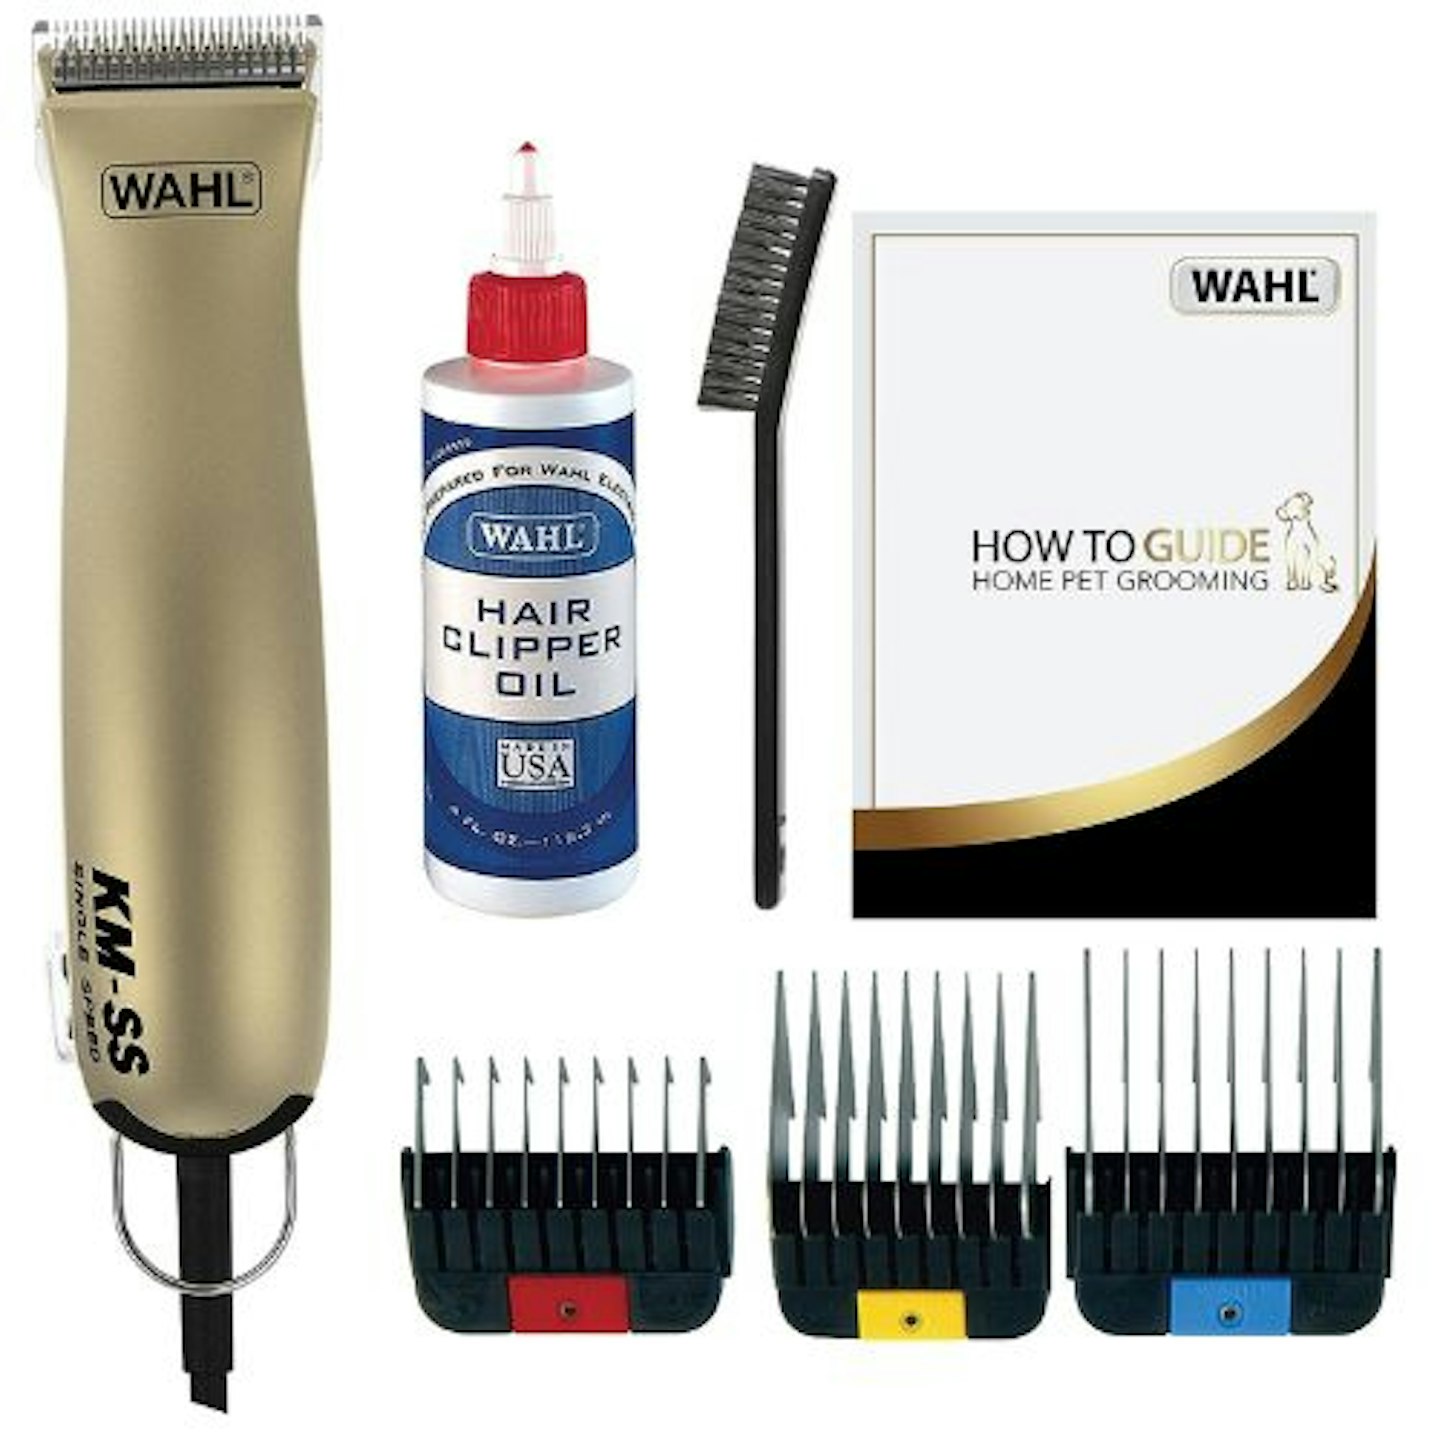 WAHL Dog Clippers Premium Grooming Kit